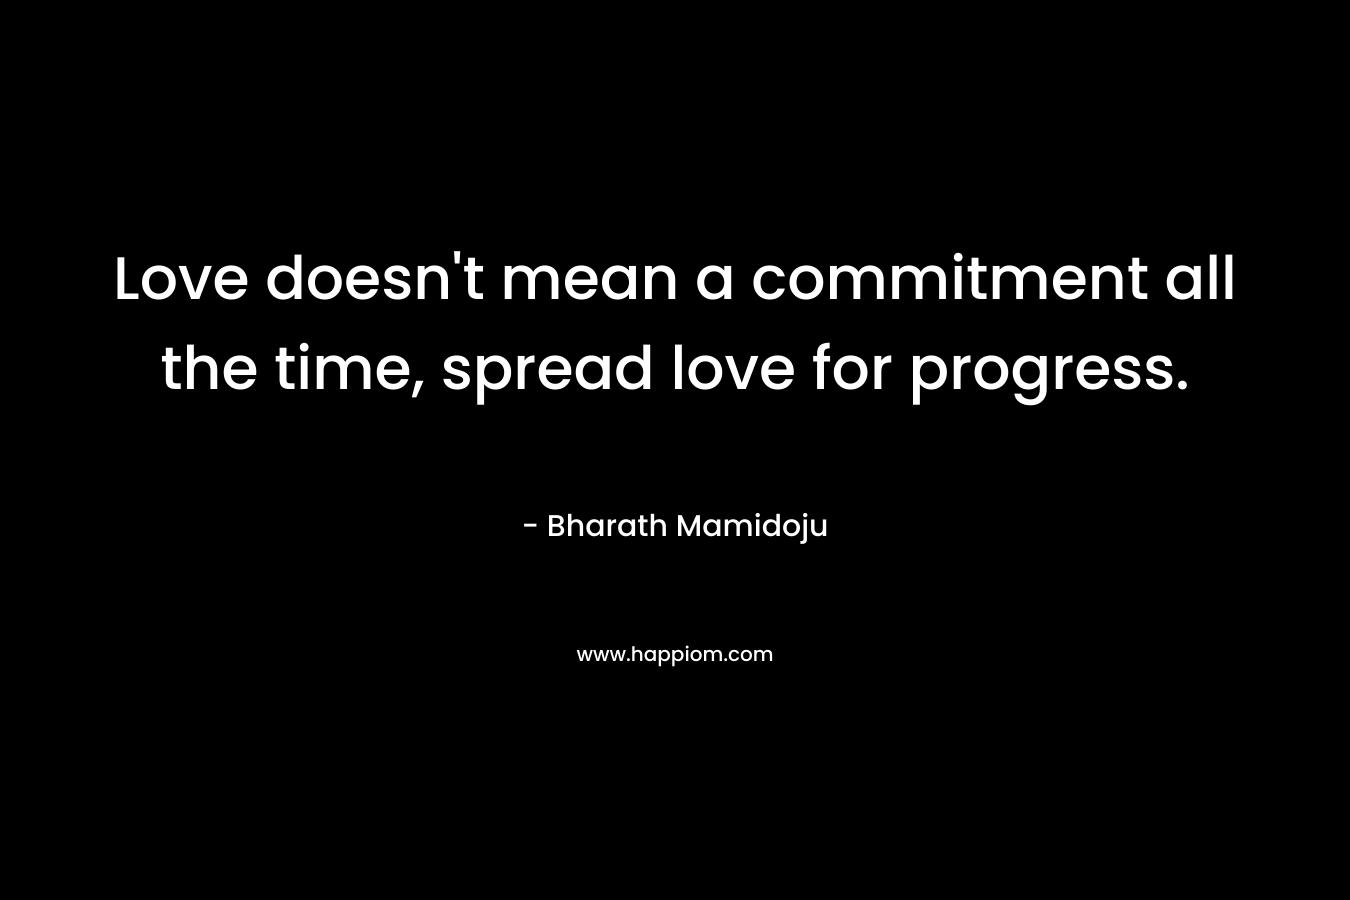 Love doesn’t mean a commitment all the time, spread love for progress. – Bharath Mamidoju